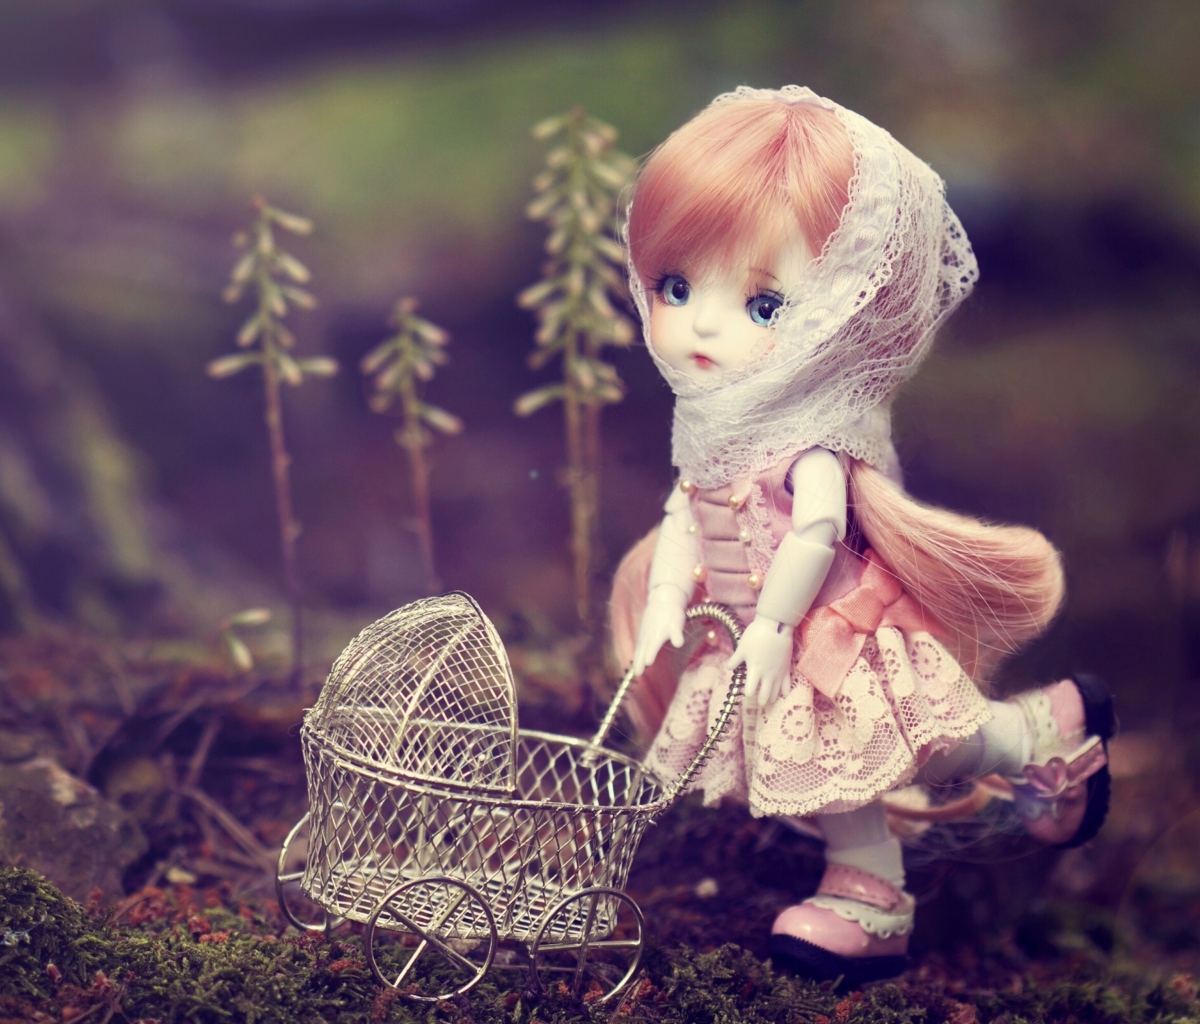 Das Doll With Baby Carriage Wallpaper 1200x1024